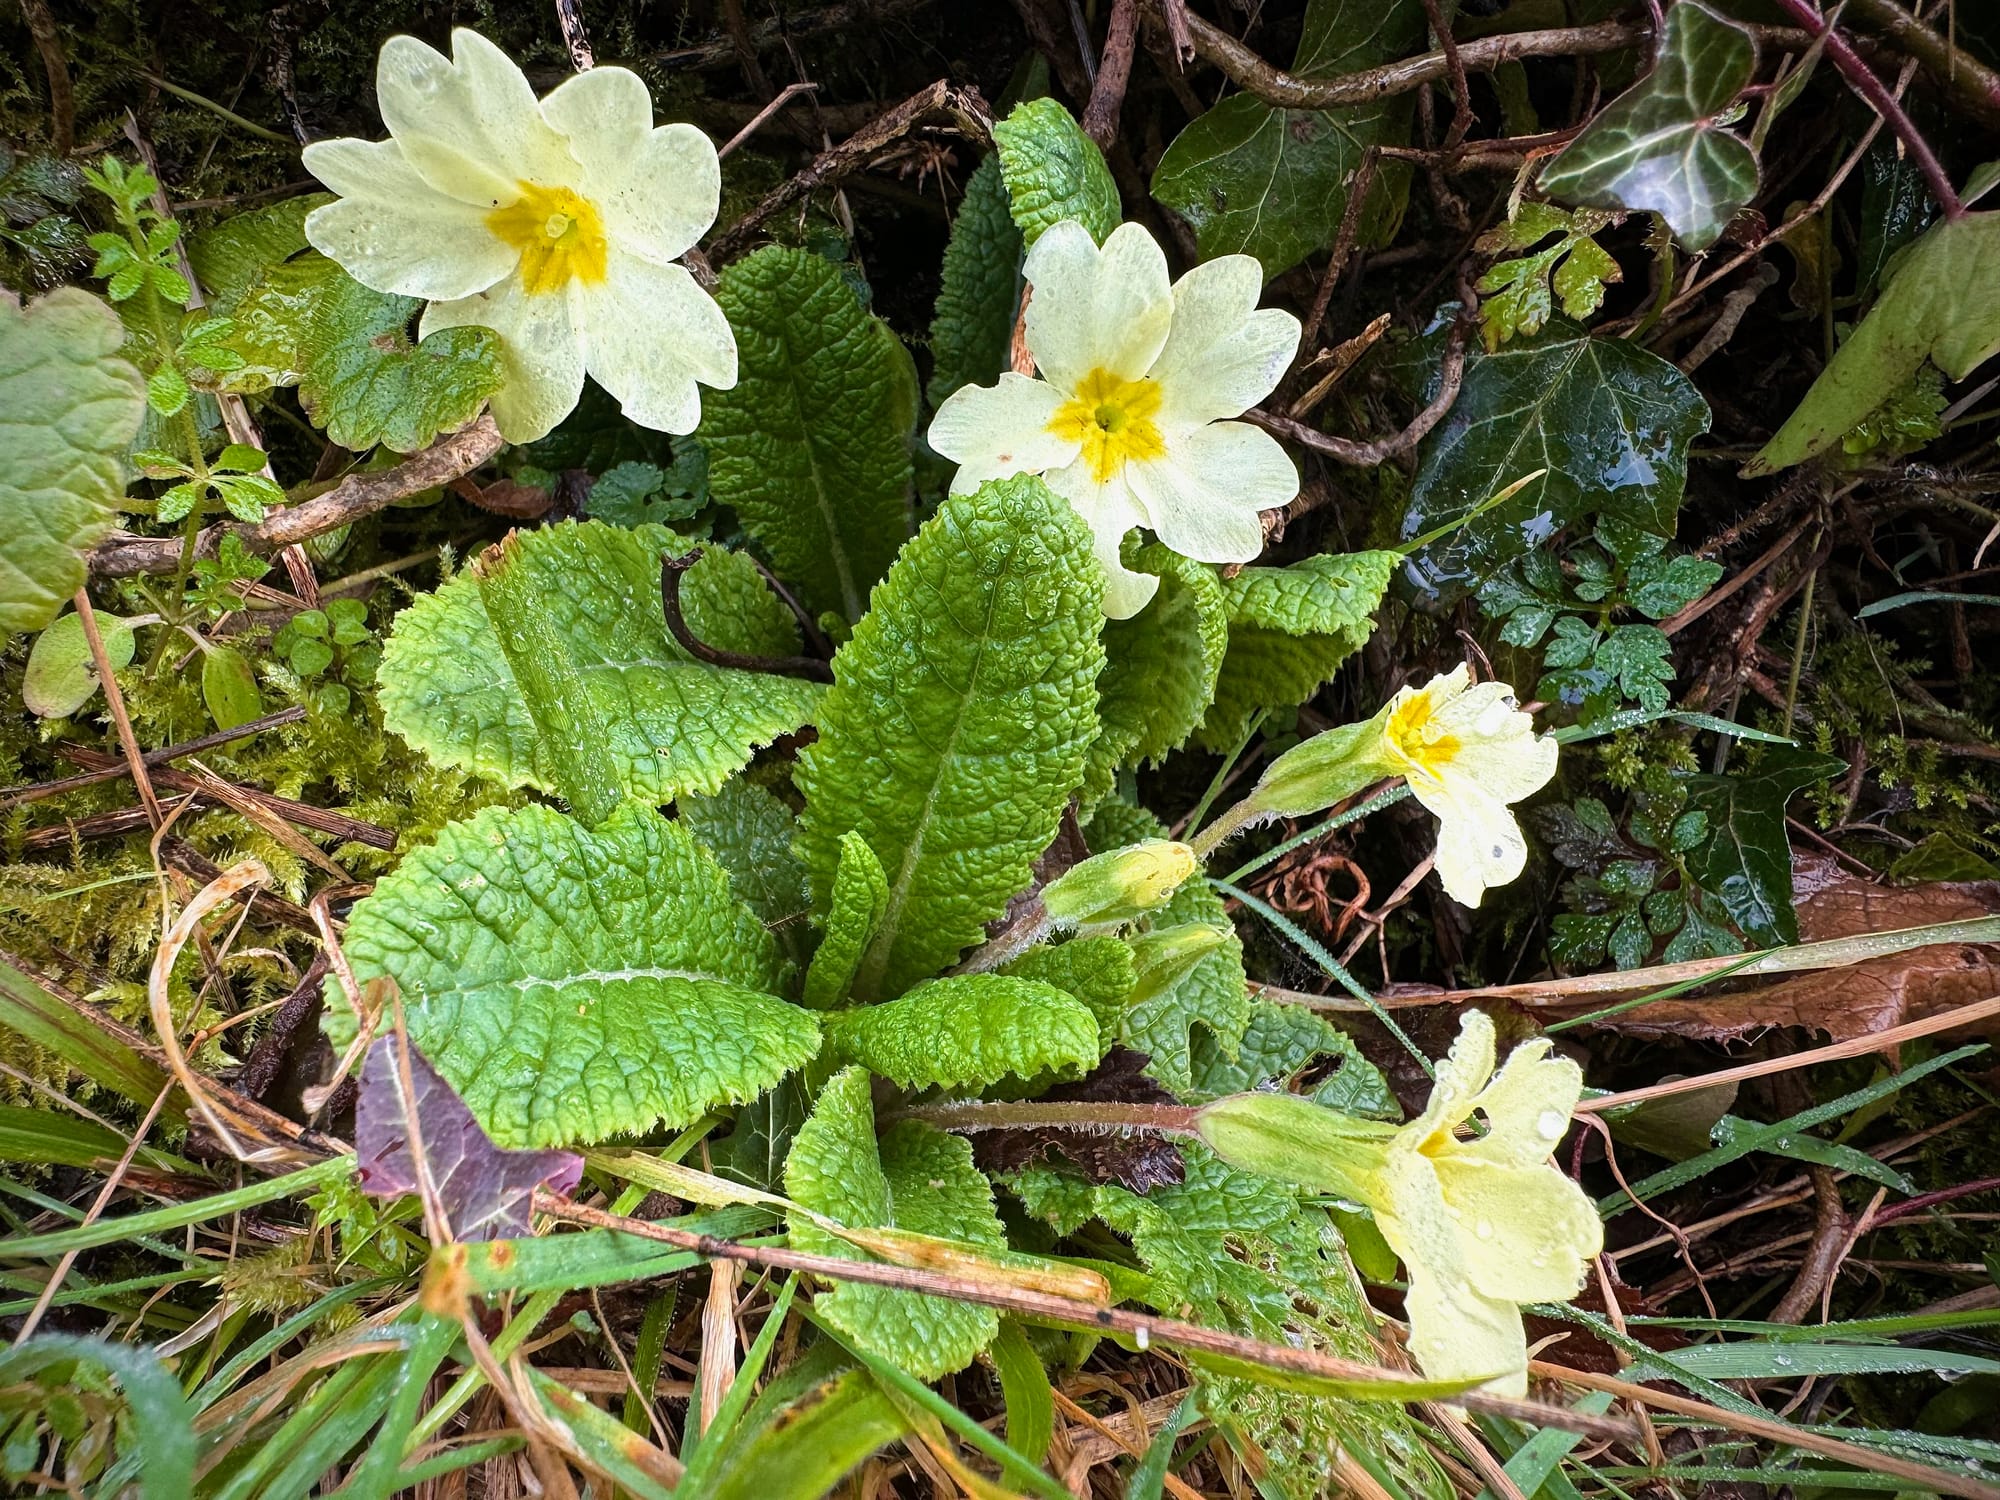 Pale yellow primrose flowers blooming out of a rosette of green, slightly furry leaves. 